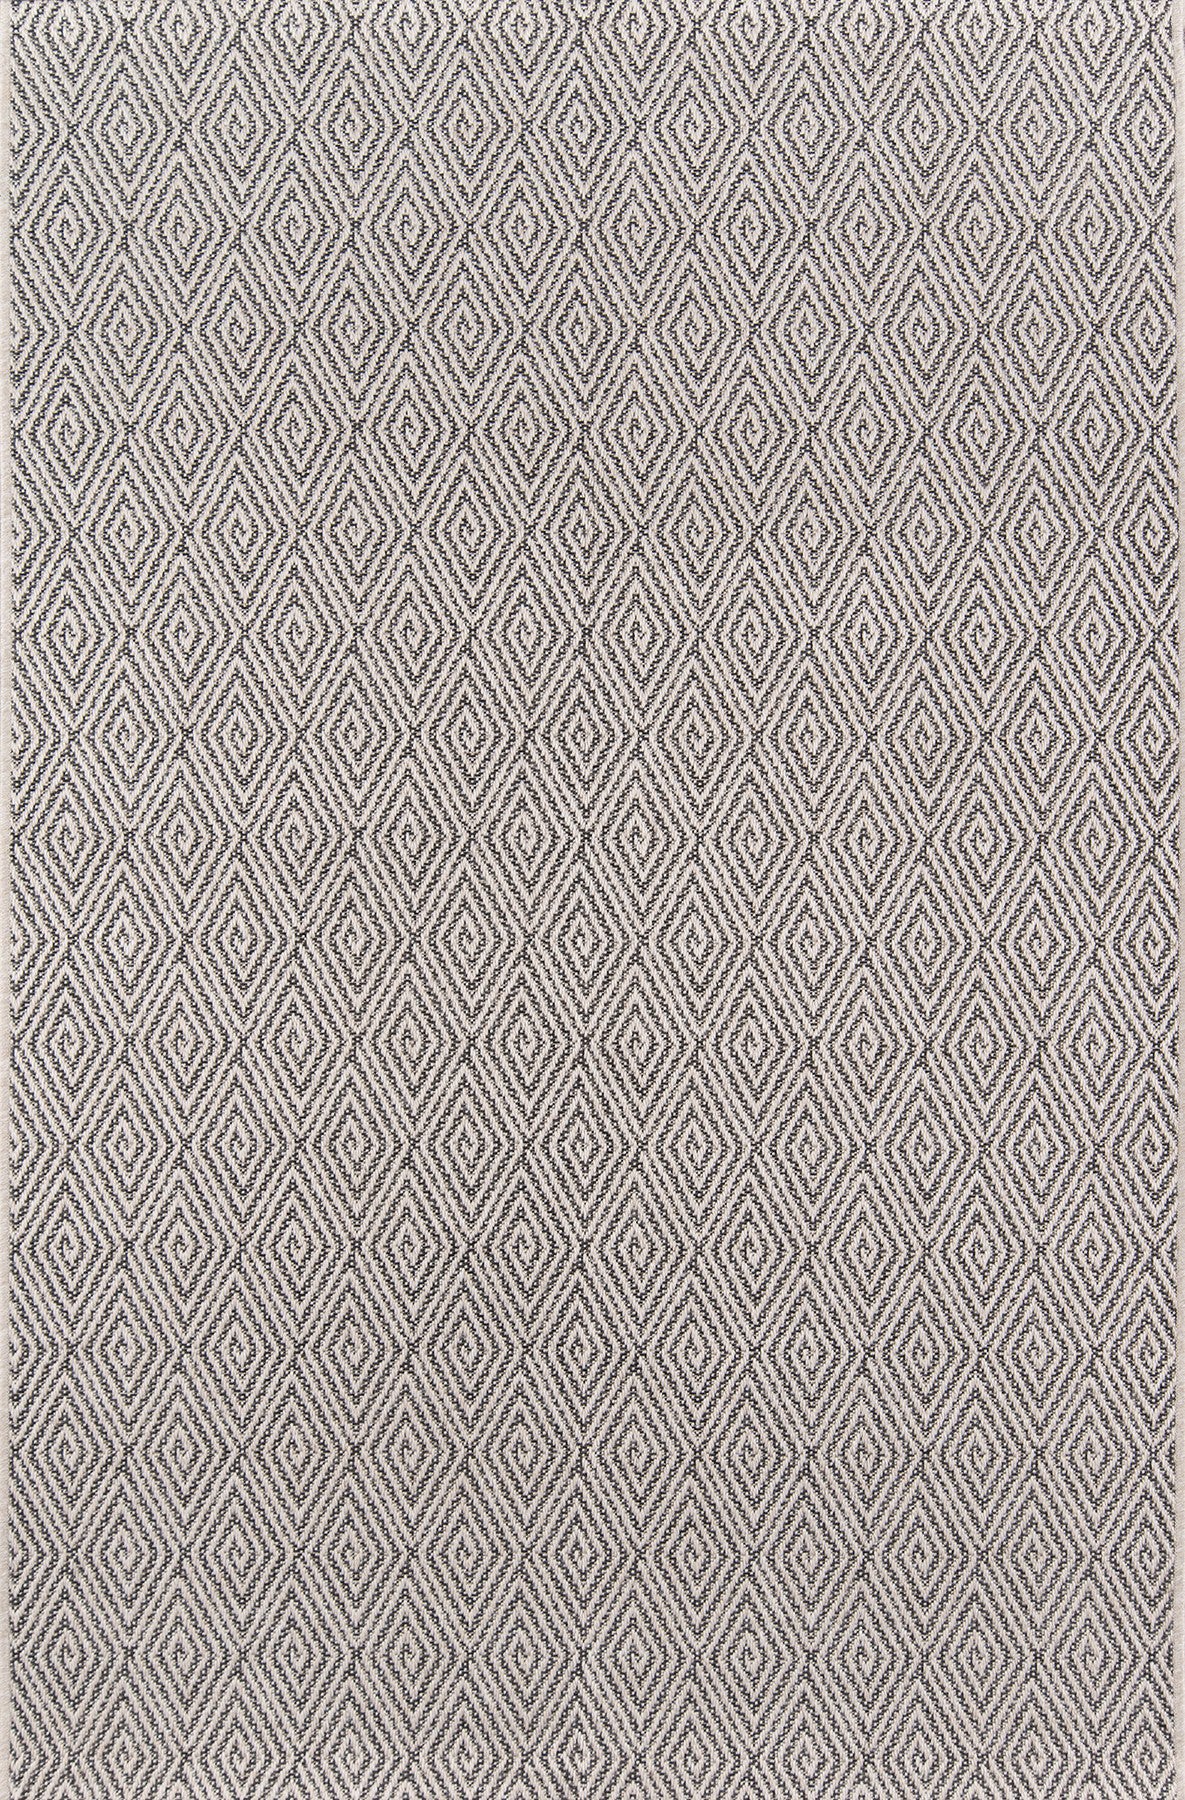 Momeni Downeast DOW-6 Charcoal Area Rug by Erin Gates main image